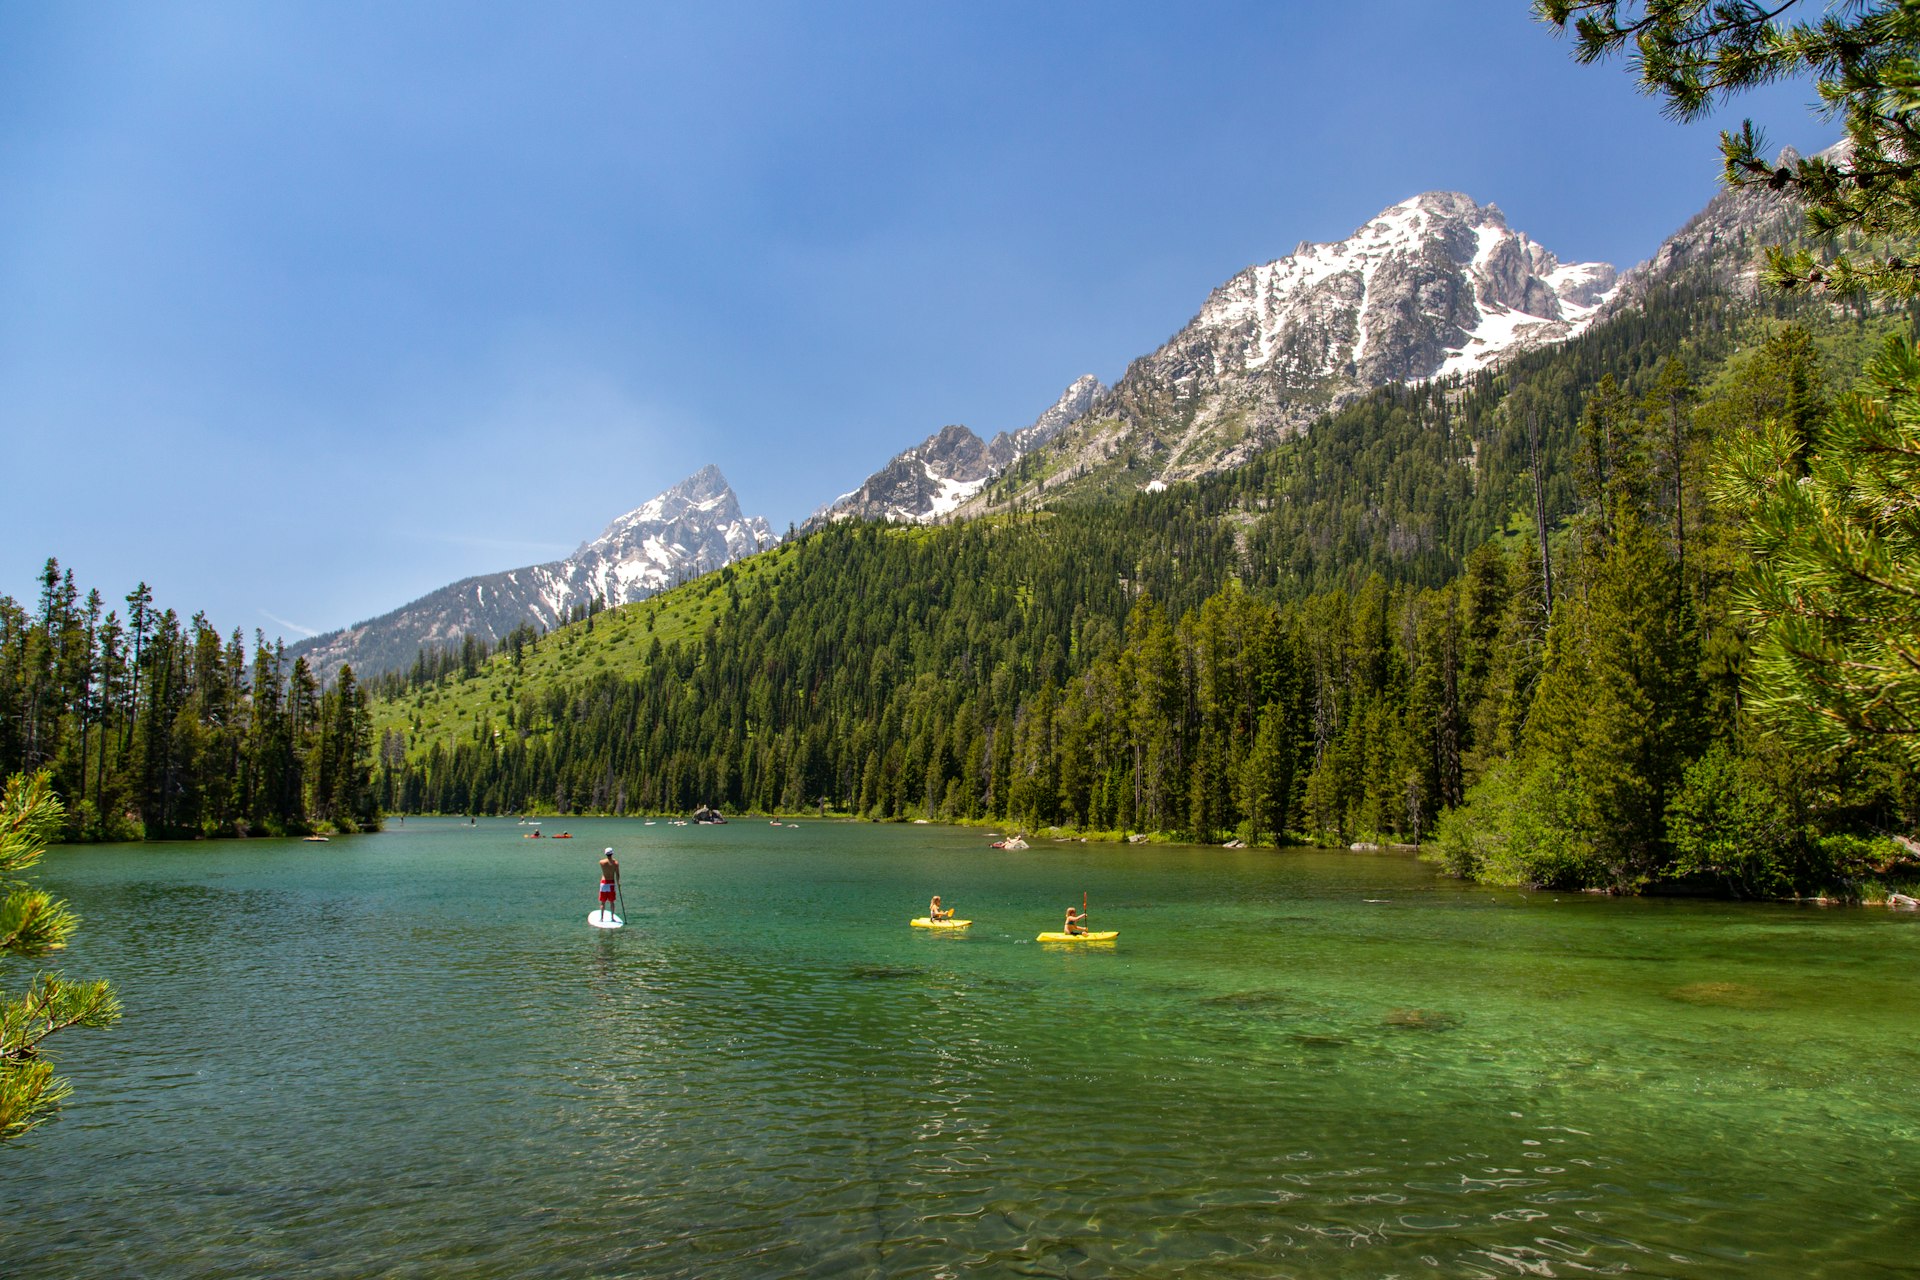 People paddle board and kayak across clear water at the base of a mountain in Grand Teton National Park